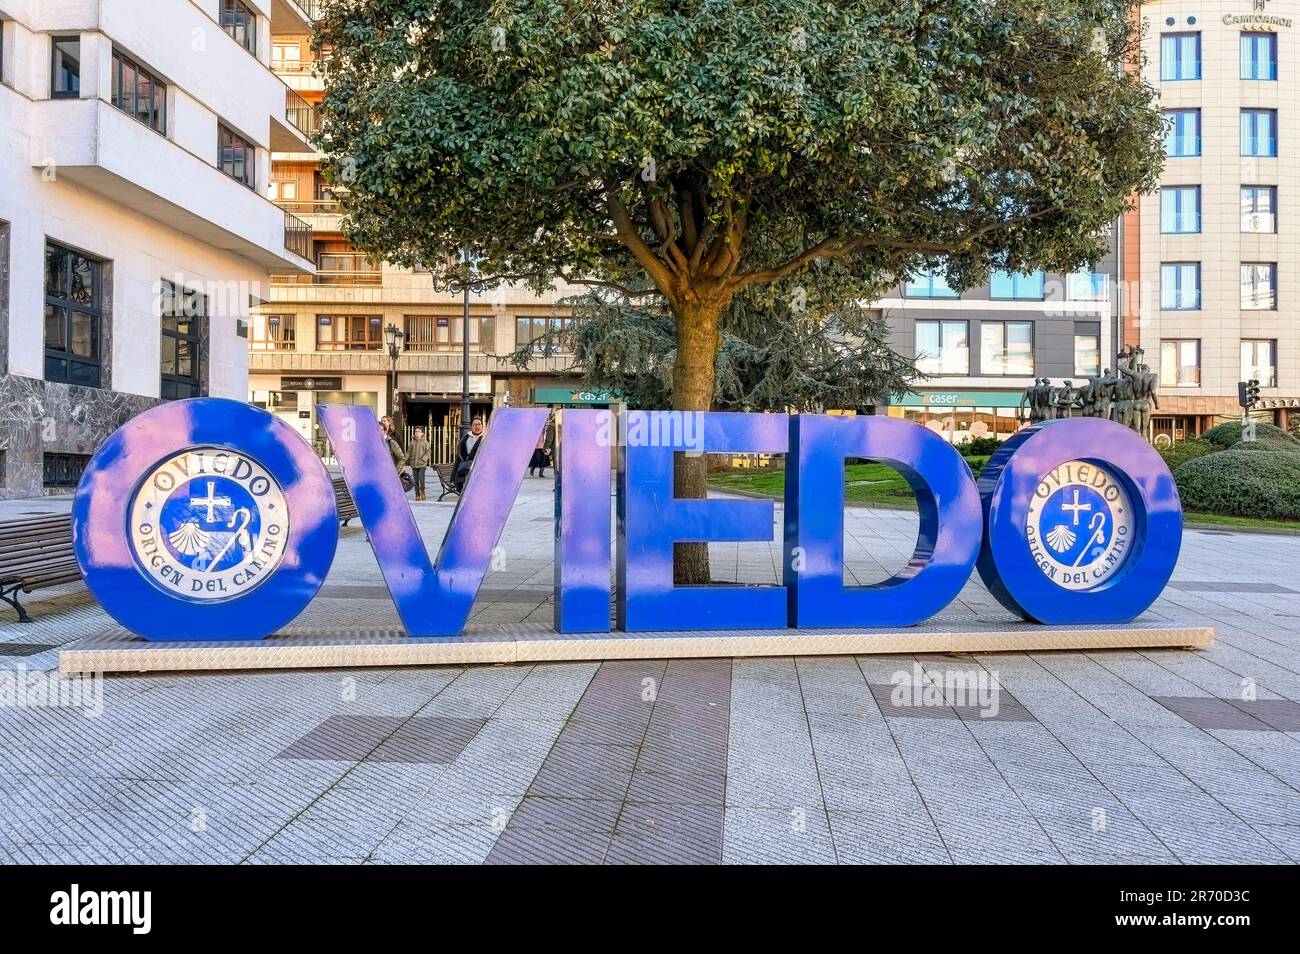 Oviedo, Asturias, Spain: A letter sculpture spelling 'Oviedo' surrounded by tiled flooring in a downtown district. Trees, city buildings, and tourists Stock Photo